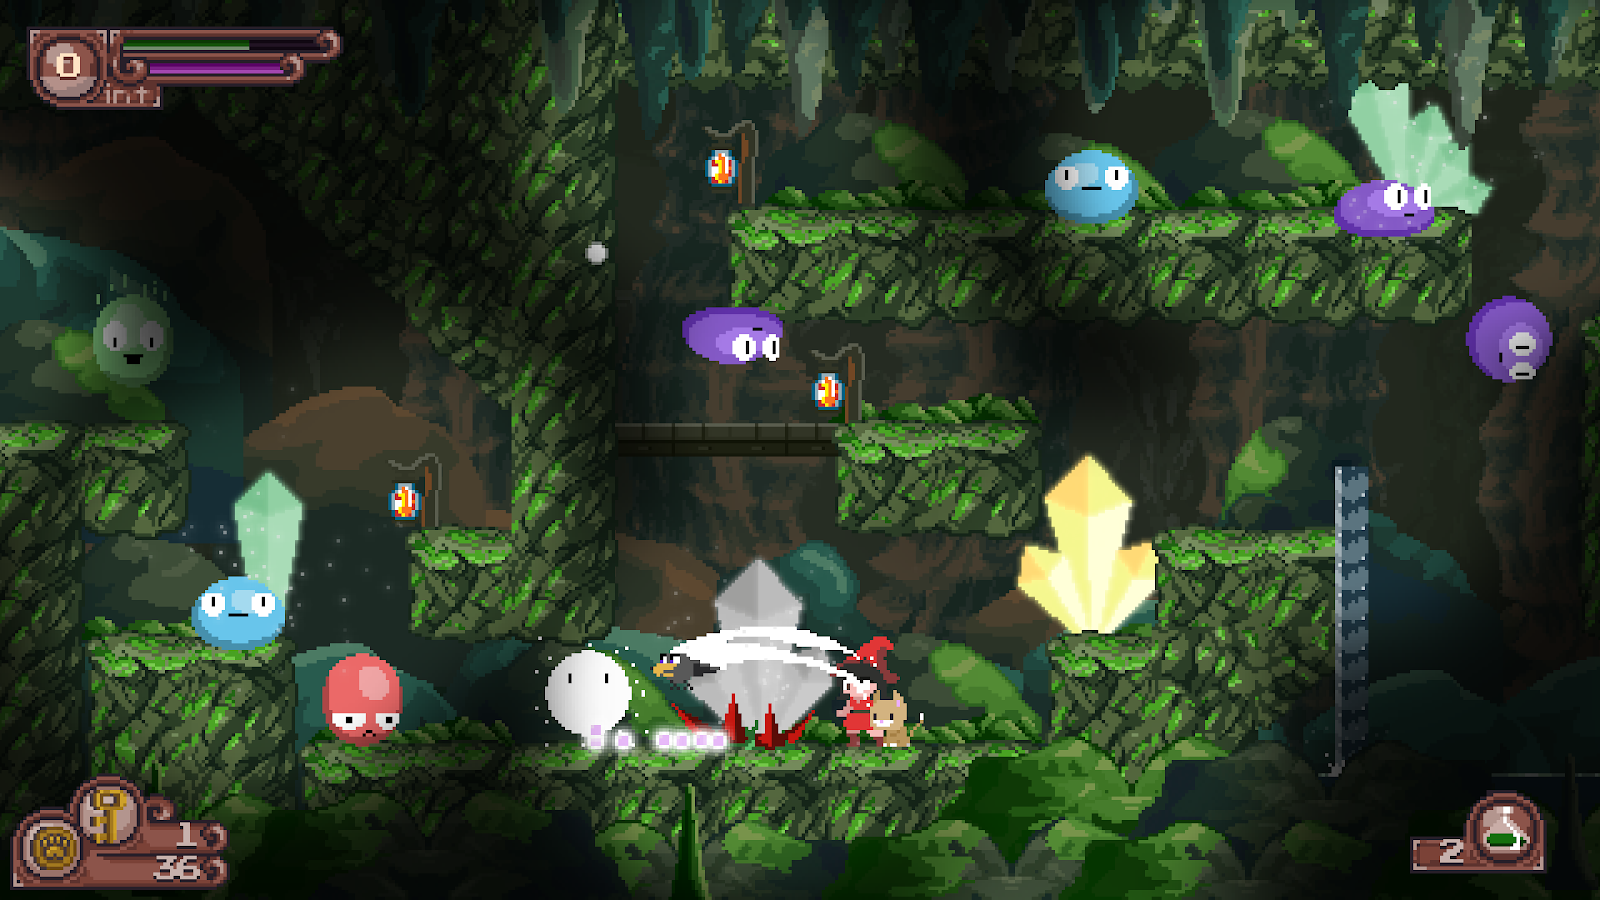 A screenshot showing a crystal filled cavern, full of enemies.